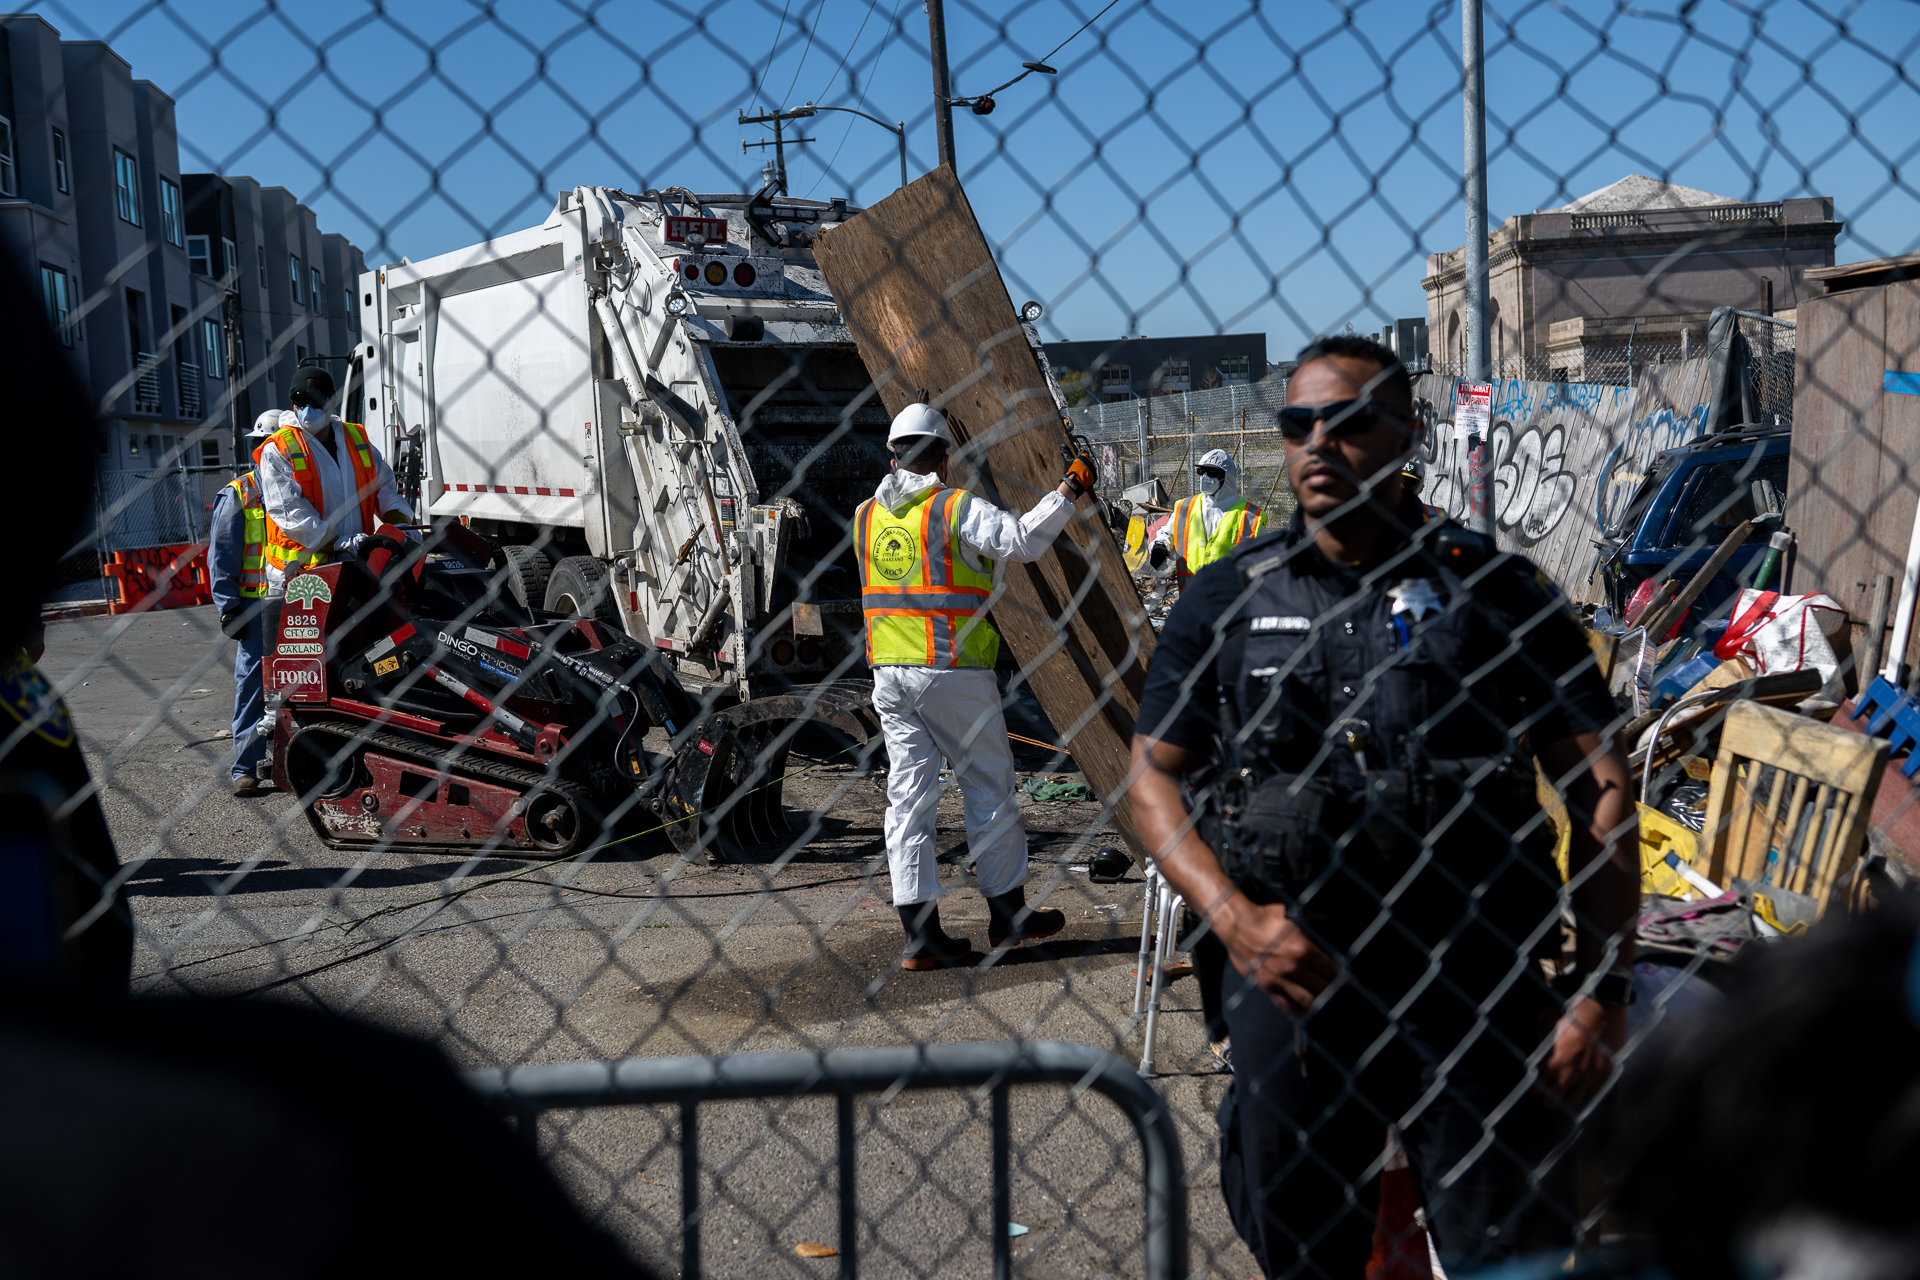 A Black police officer is shown standing behind a chain link fence as city workers behind him haul wood and other materials into large garbage trucks.